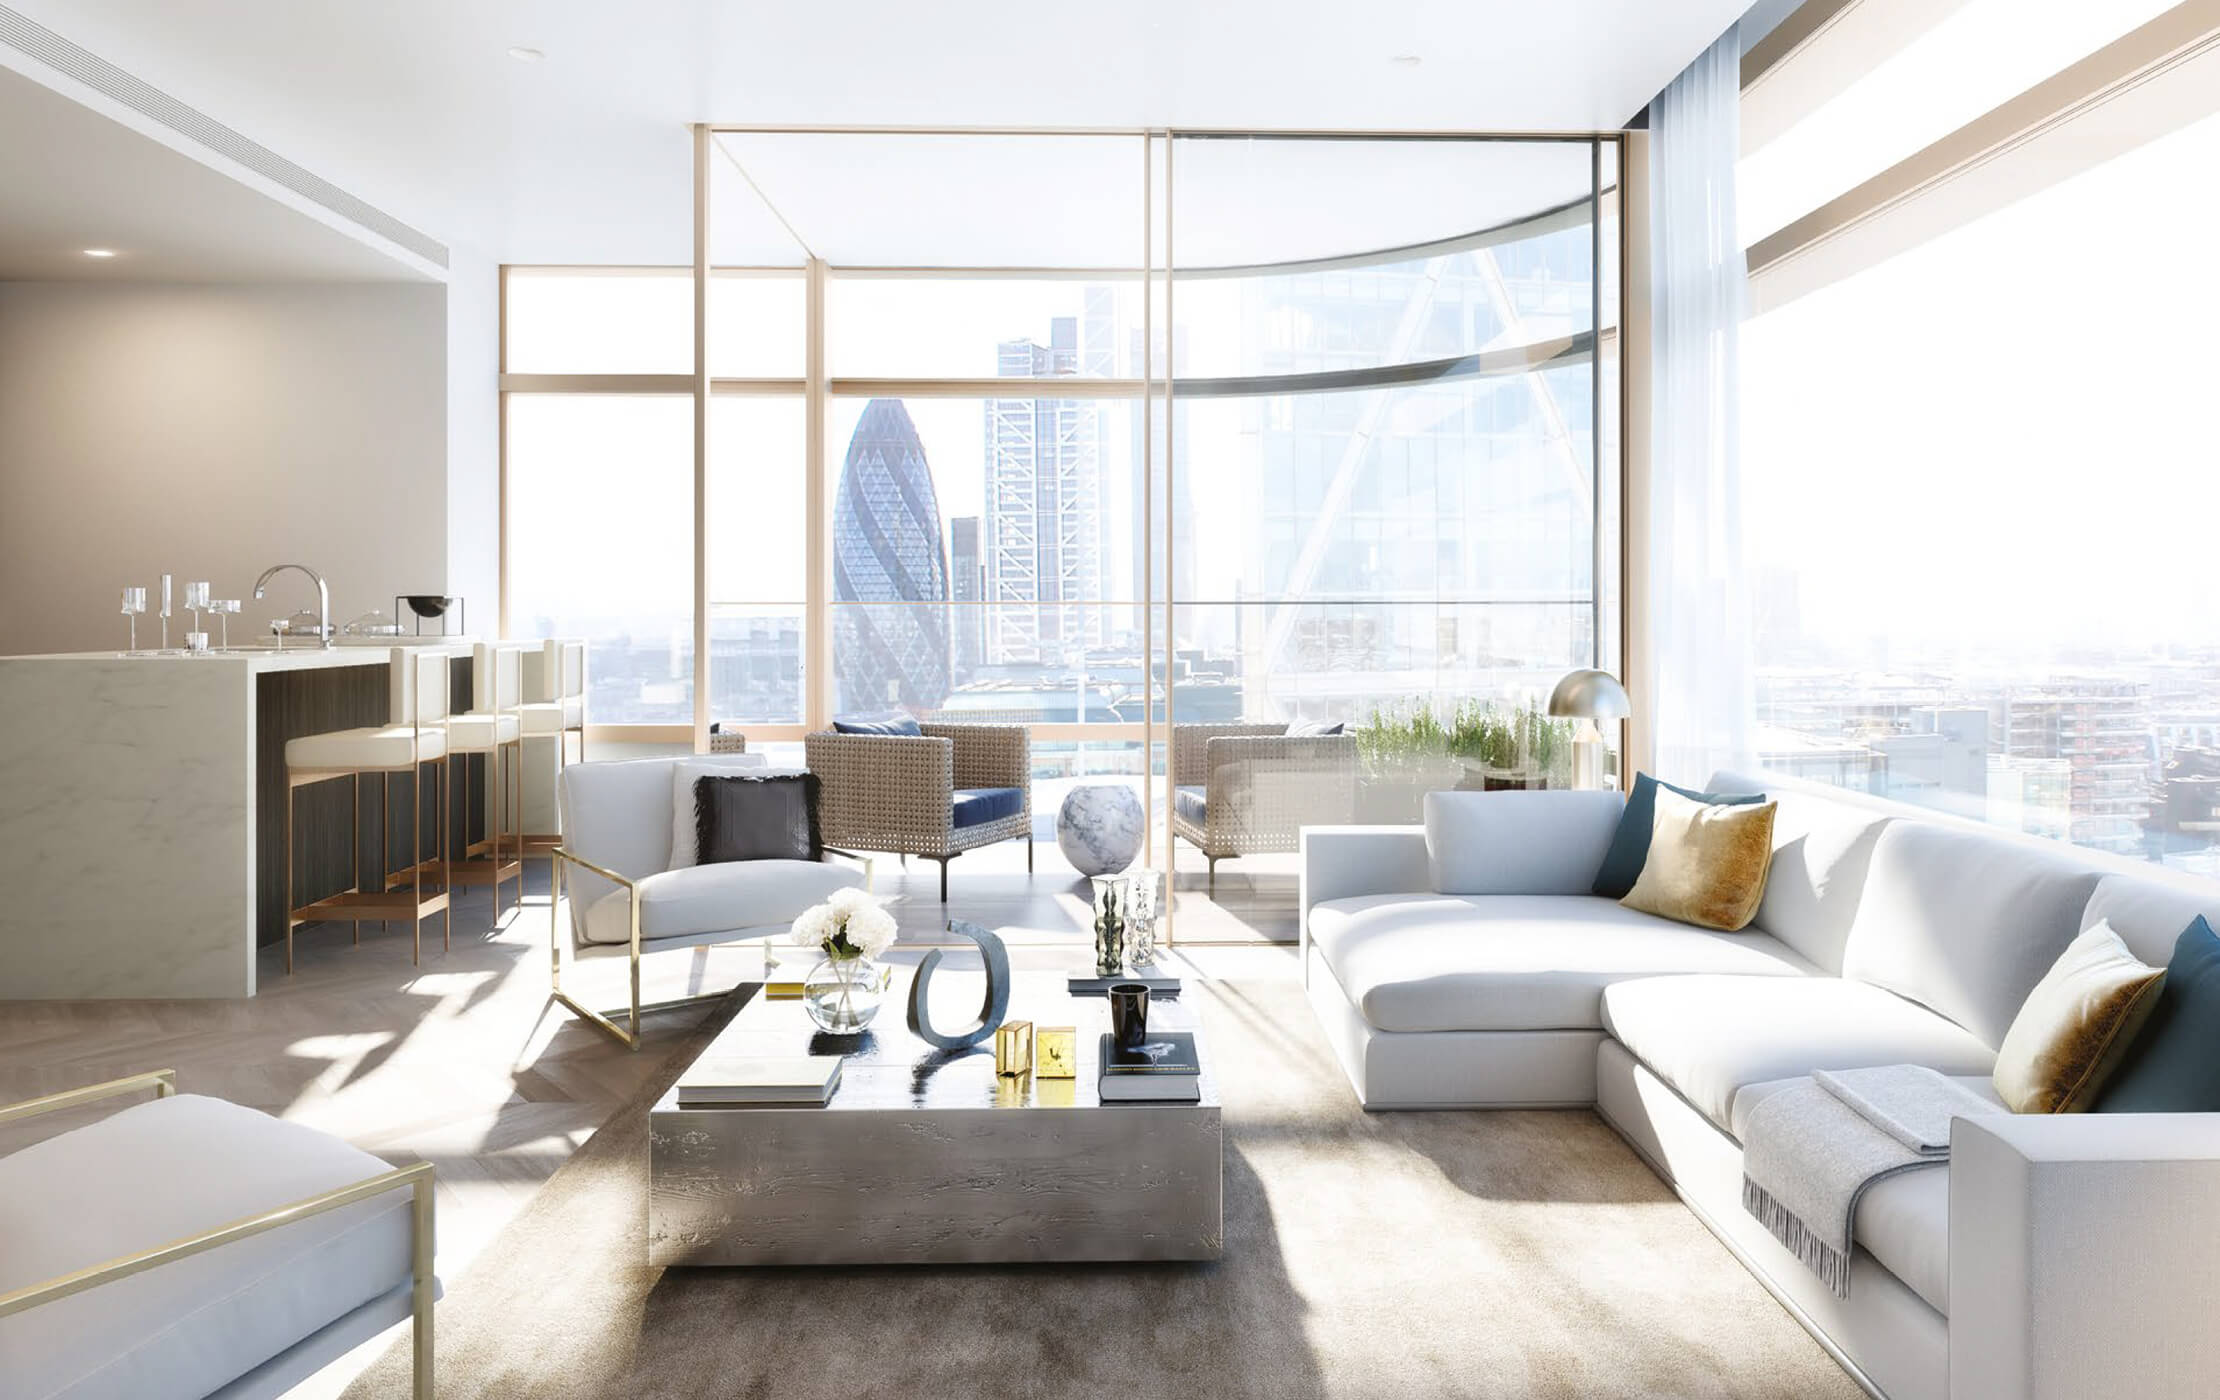 3D CGI render of a spacious apartment interior, with commanding views of The Gherkin (30 St Mary Axe) and the city